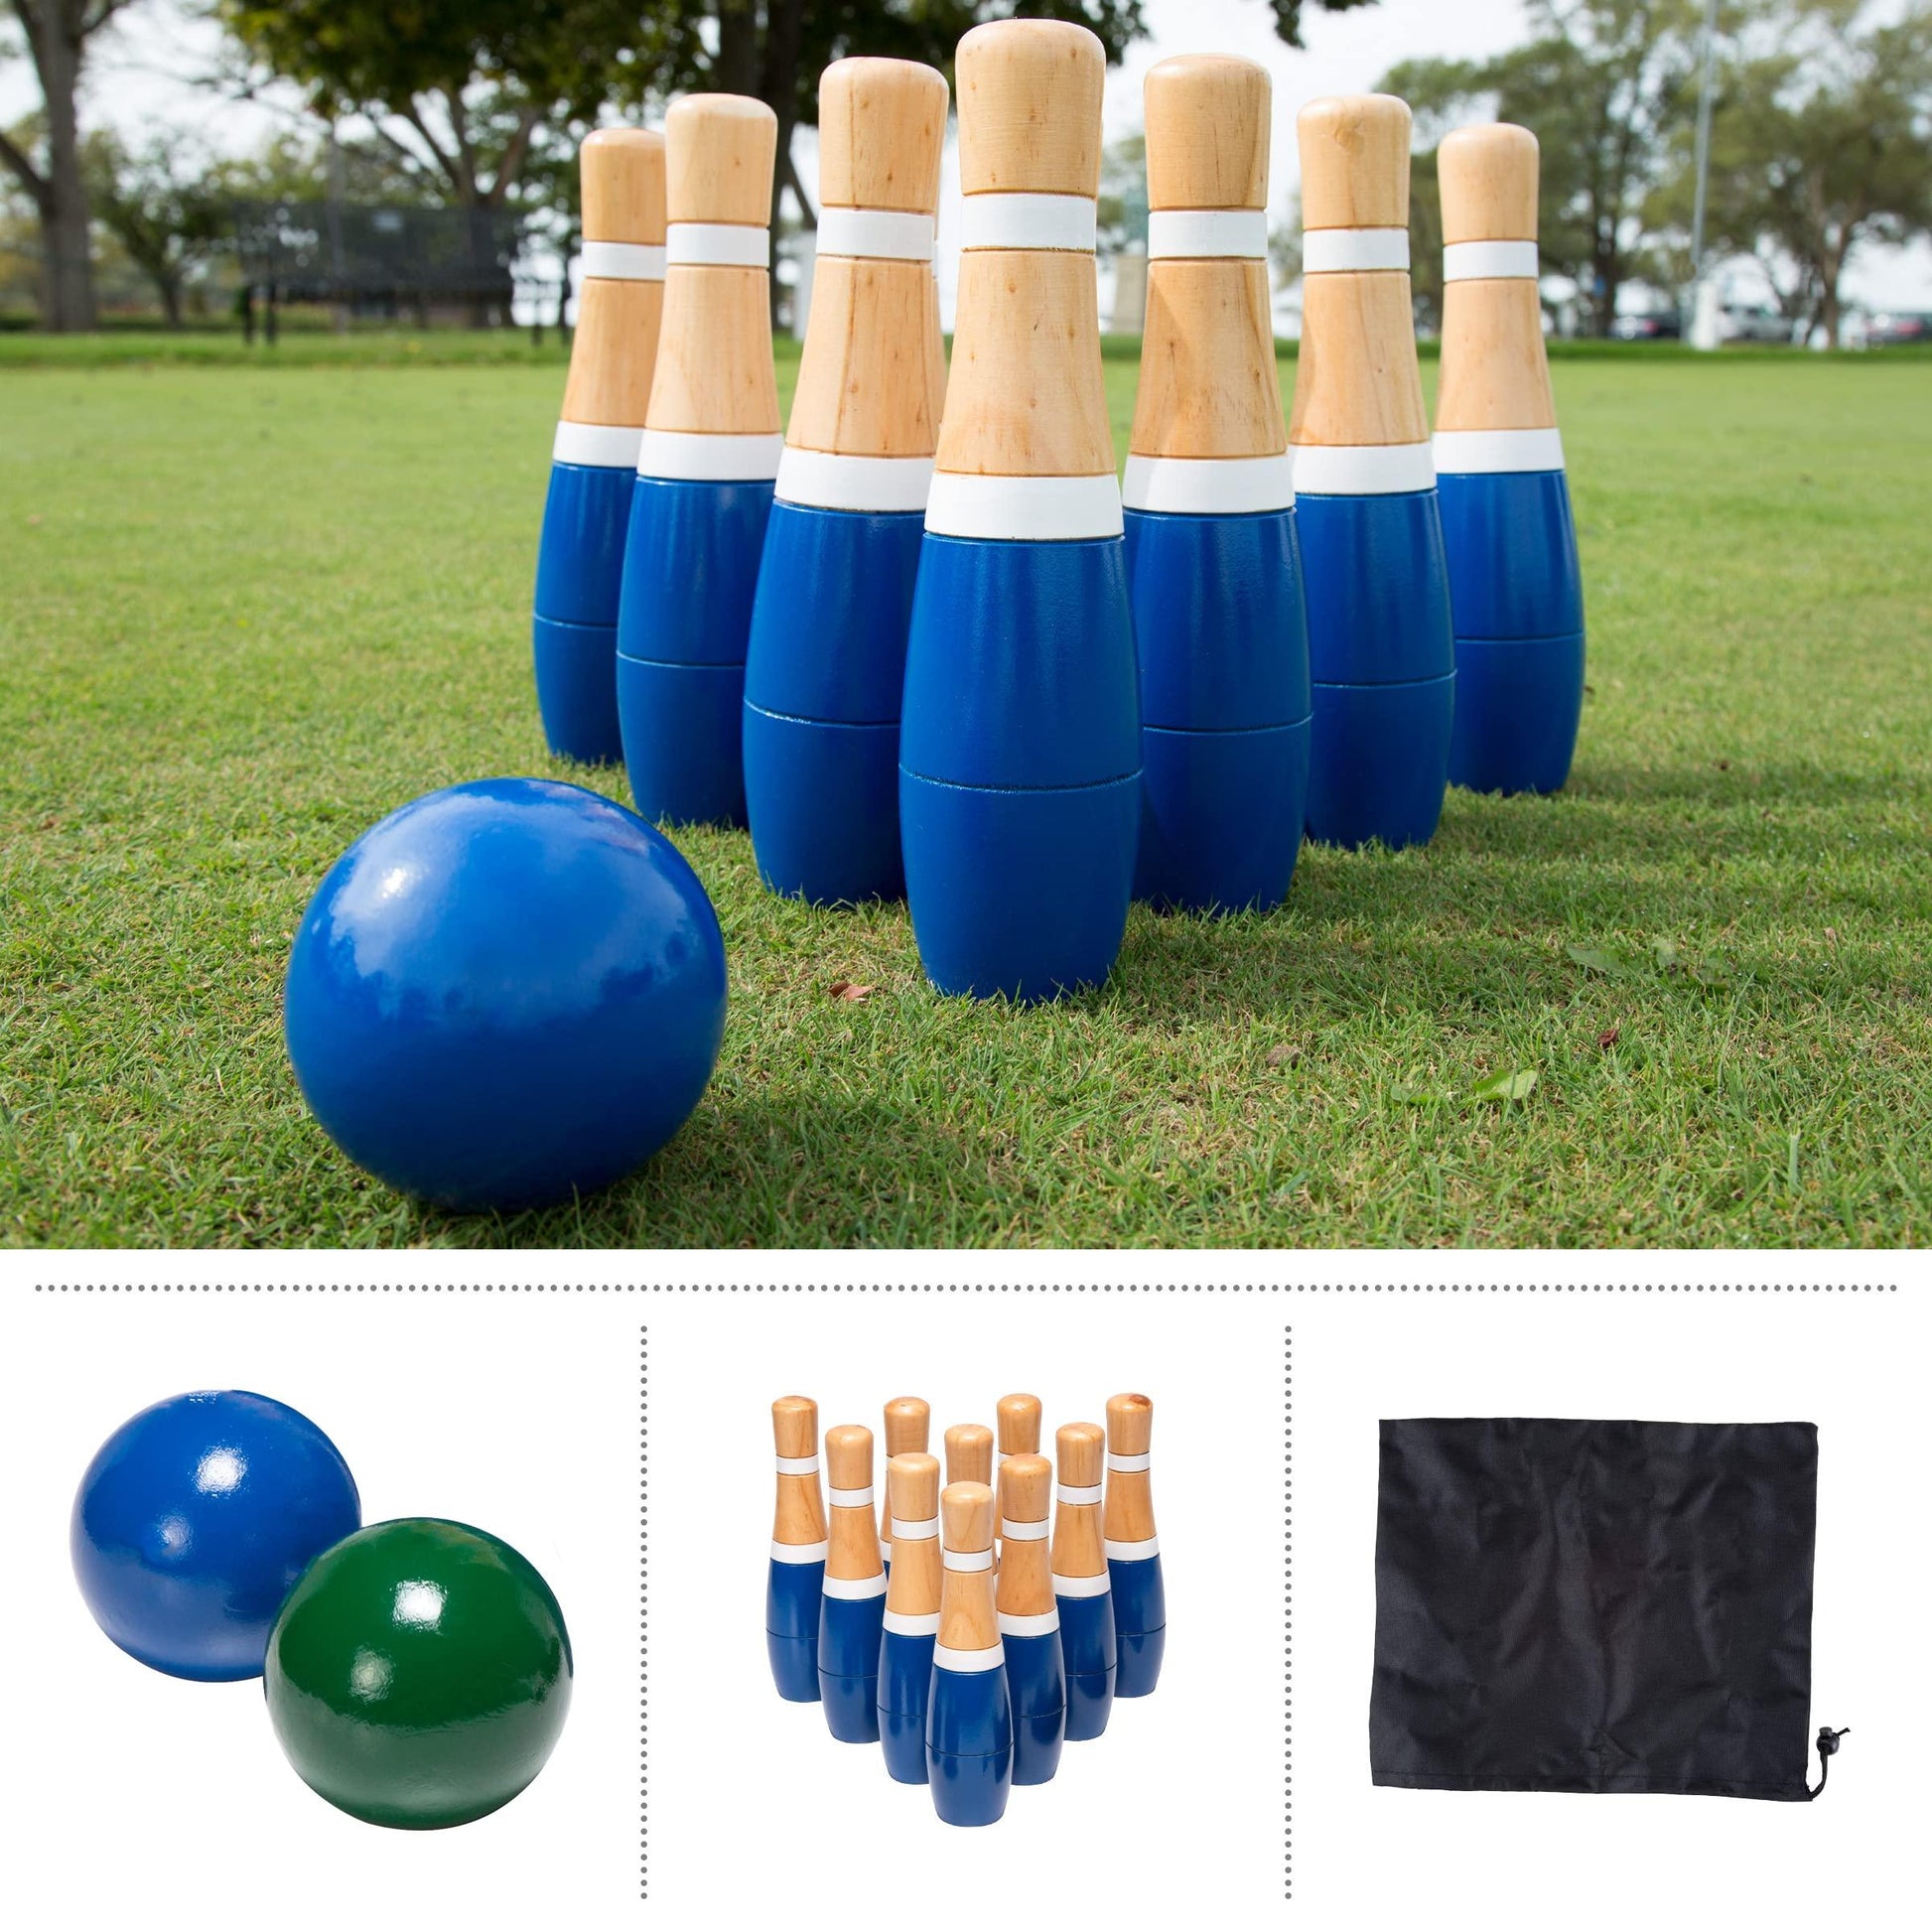 Backyard Lawn Bowling Game – Indoor and Outdoor Family Fun for Kids and Adults – 10 Wooden Pins, 2 Balls, and Mesh Carrying Bag by Hey! Play! (8-Inch), Blue & White - CookCave